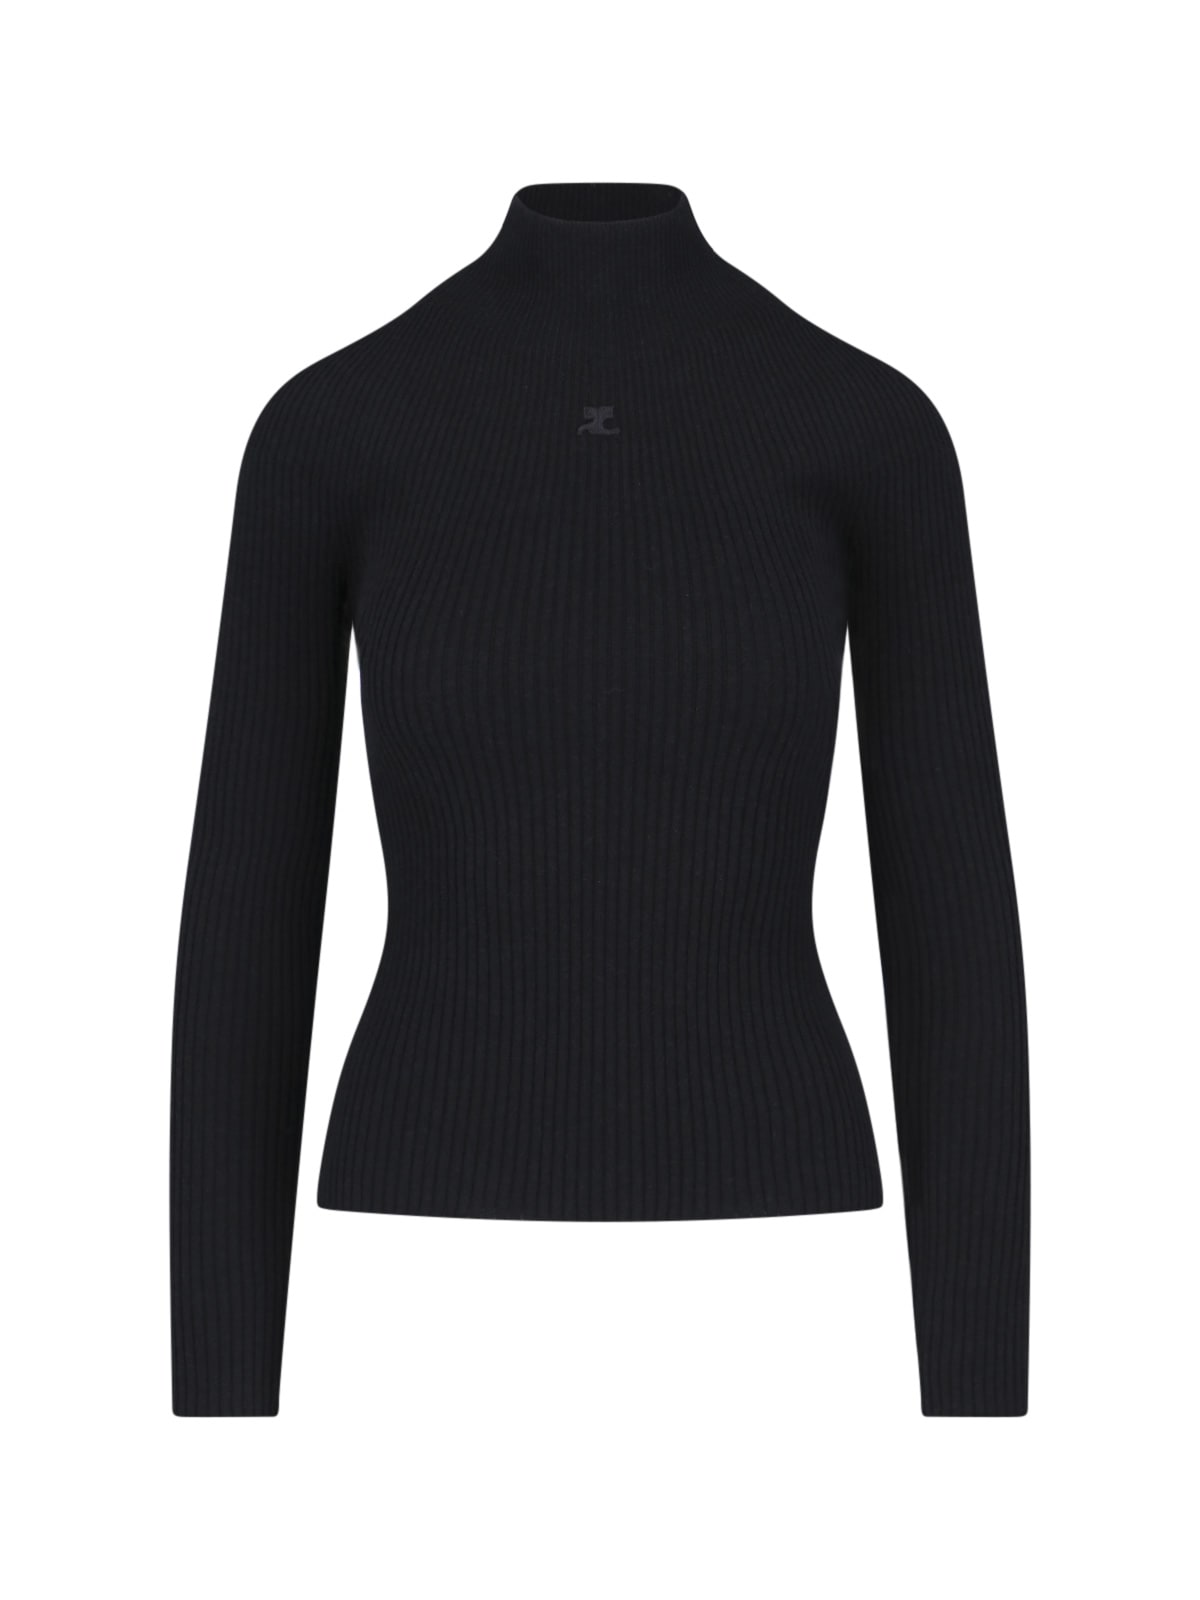 Courrèges Ribbed Turtleneck Sweater